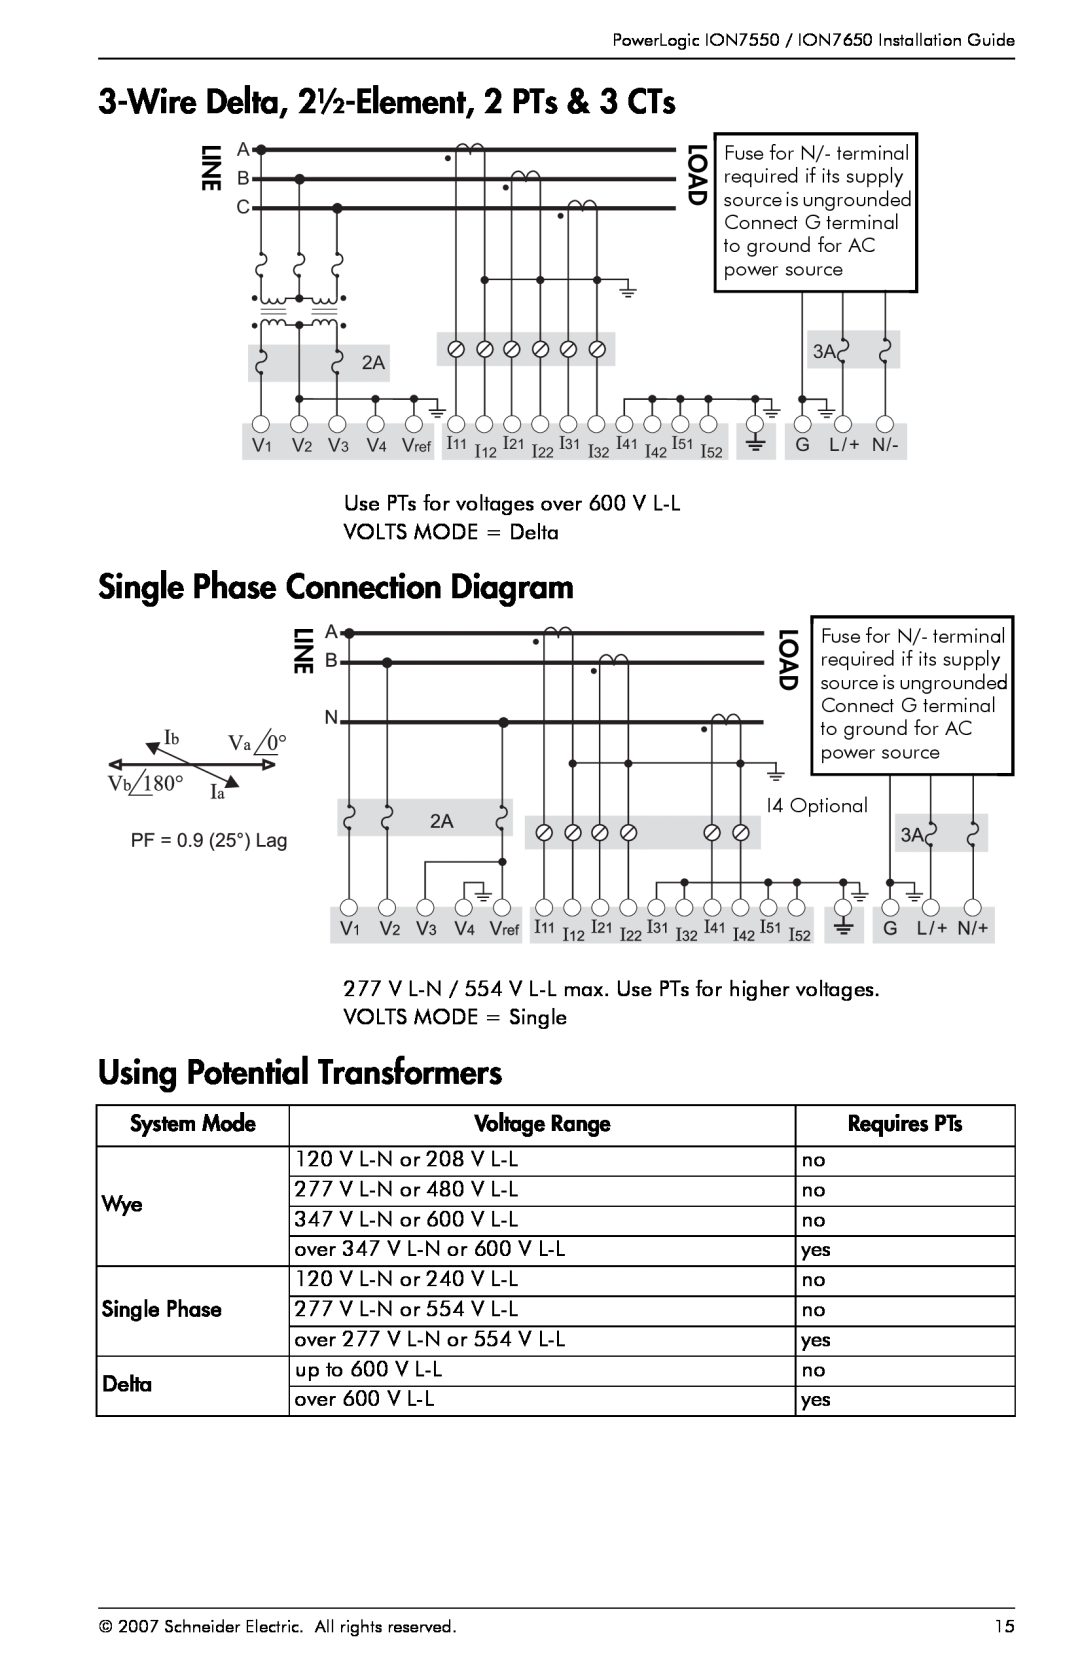 Schneider Electric ION7550, ION7650 manual Wire Delta, 2½-Element, 2 PTs & 3 CTs, Single Phase Connection Diagram, Line 